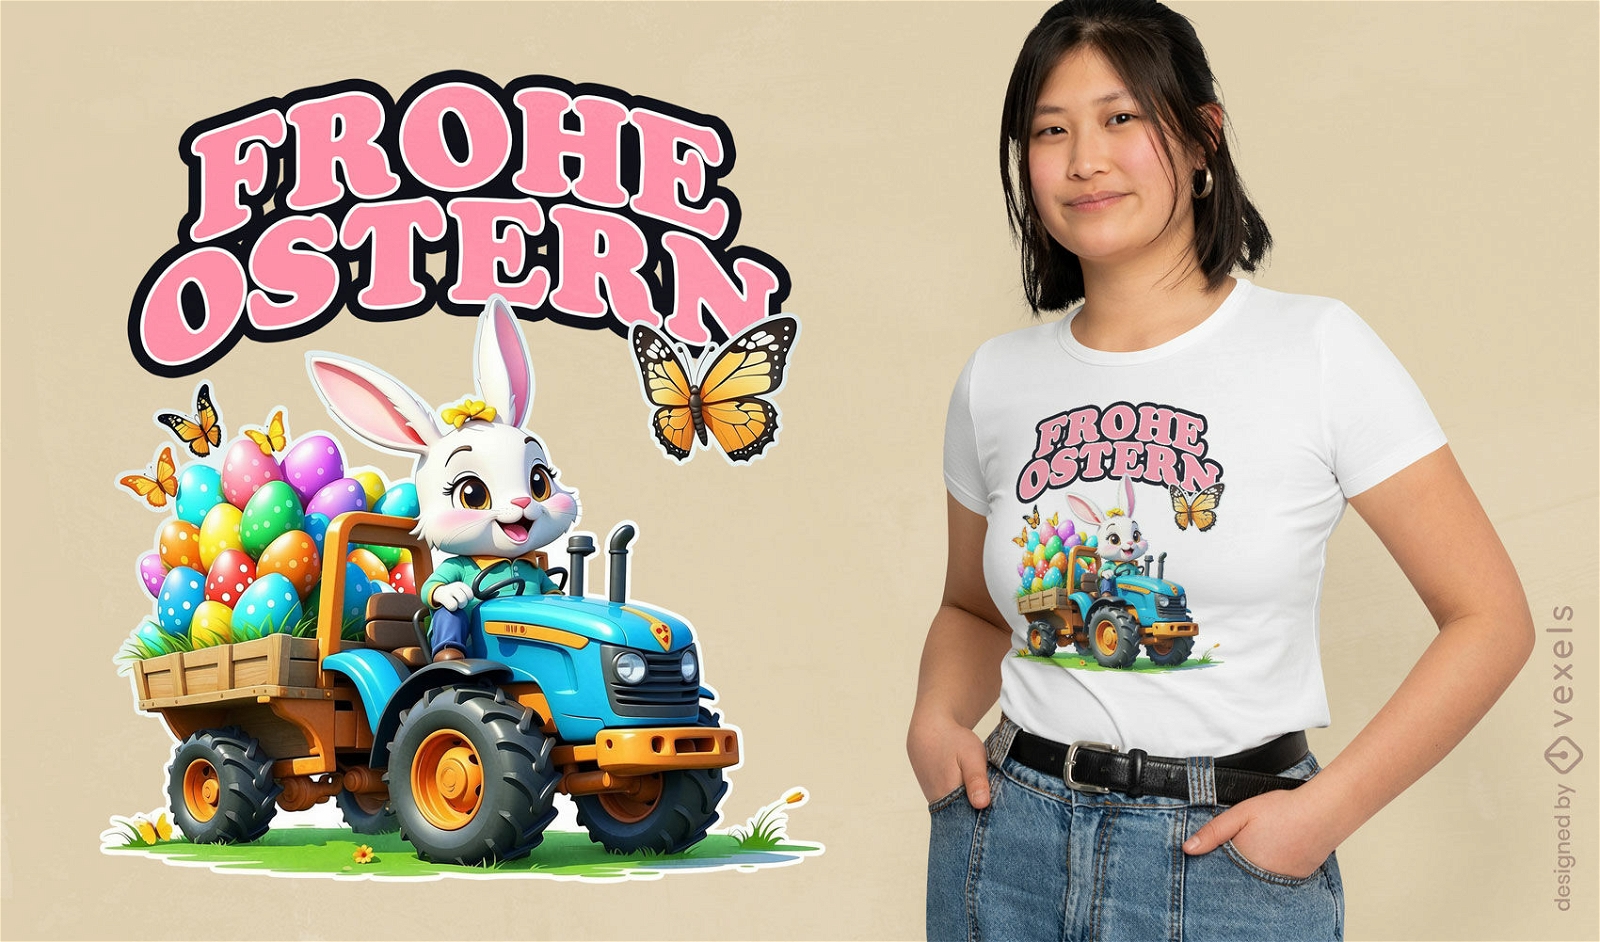 Easter bunny tractor t-shirt design